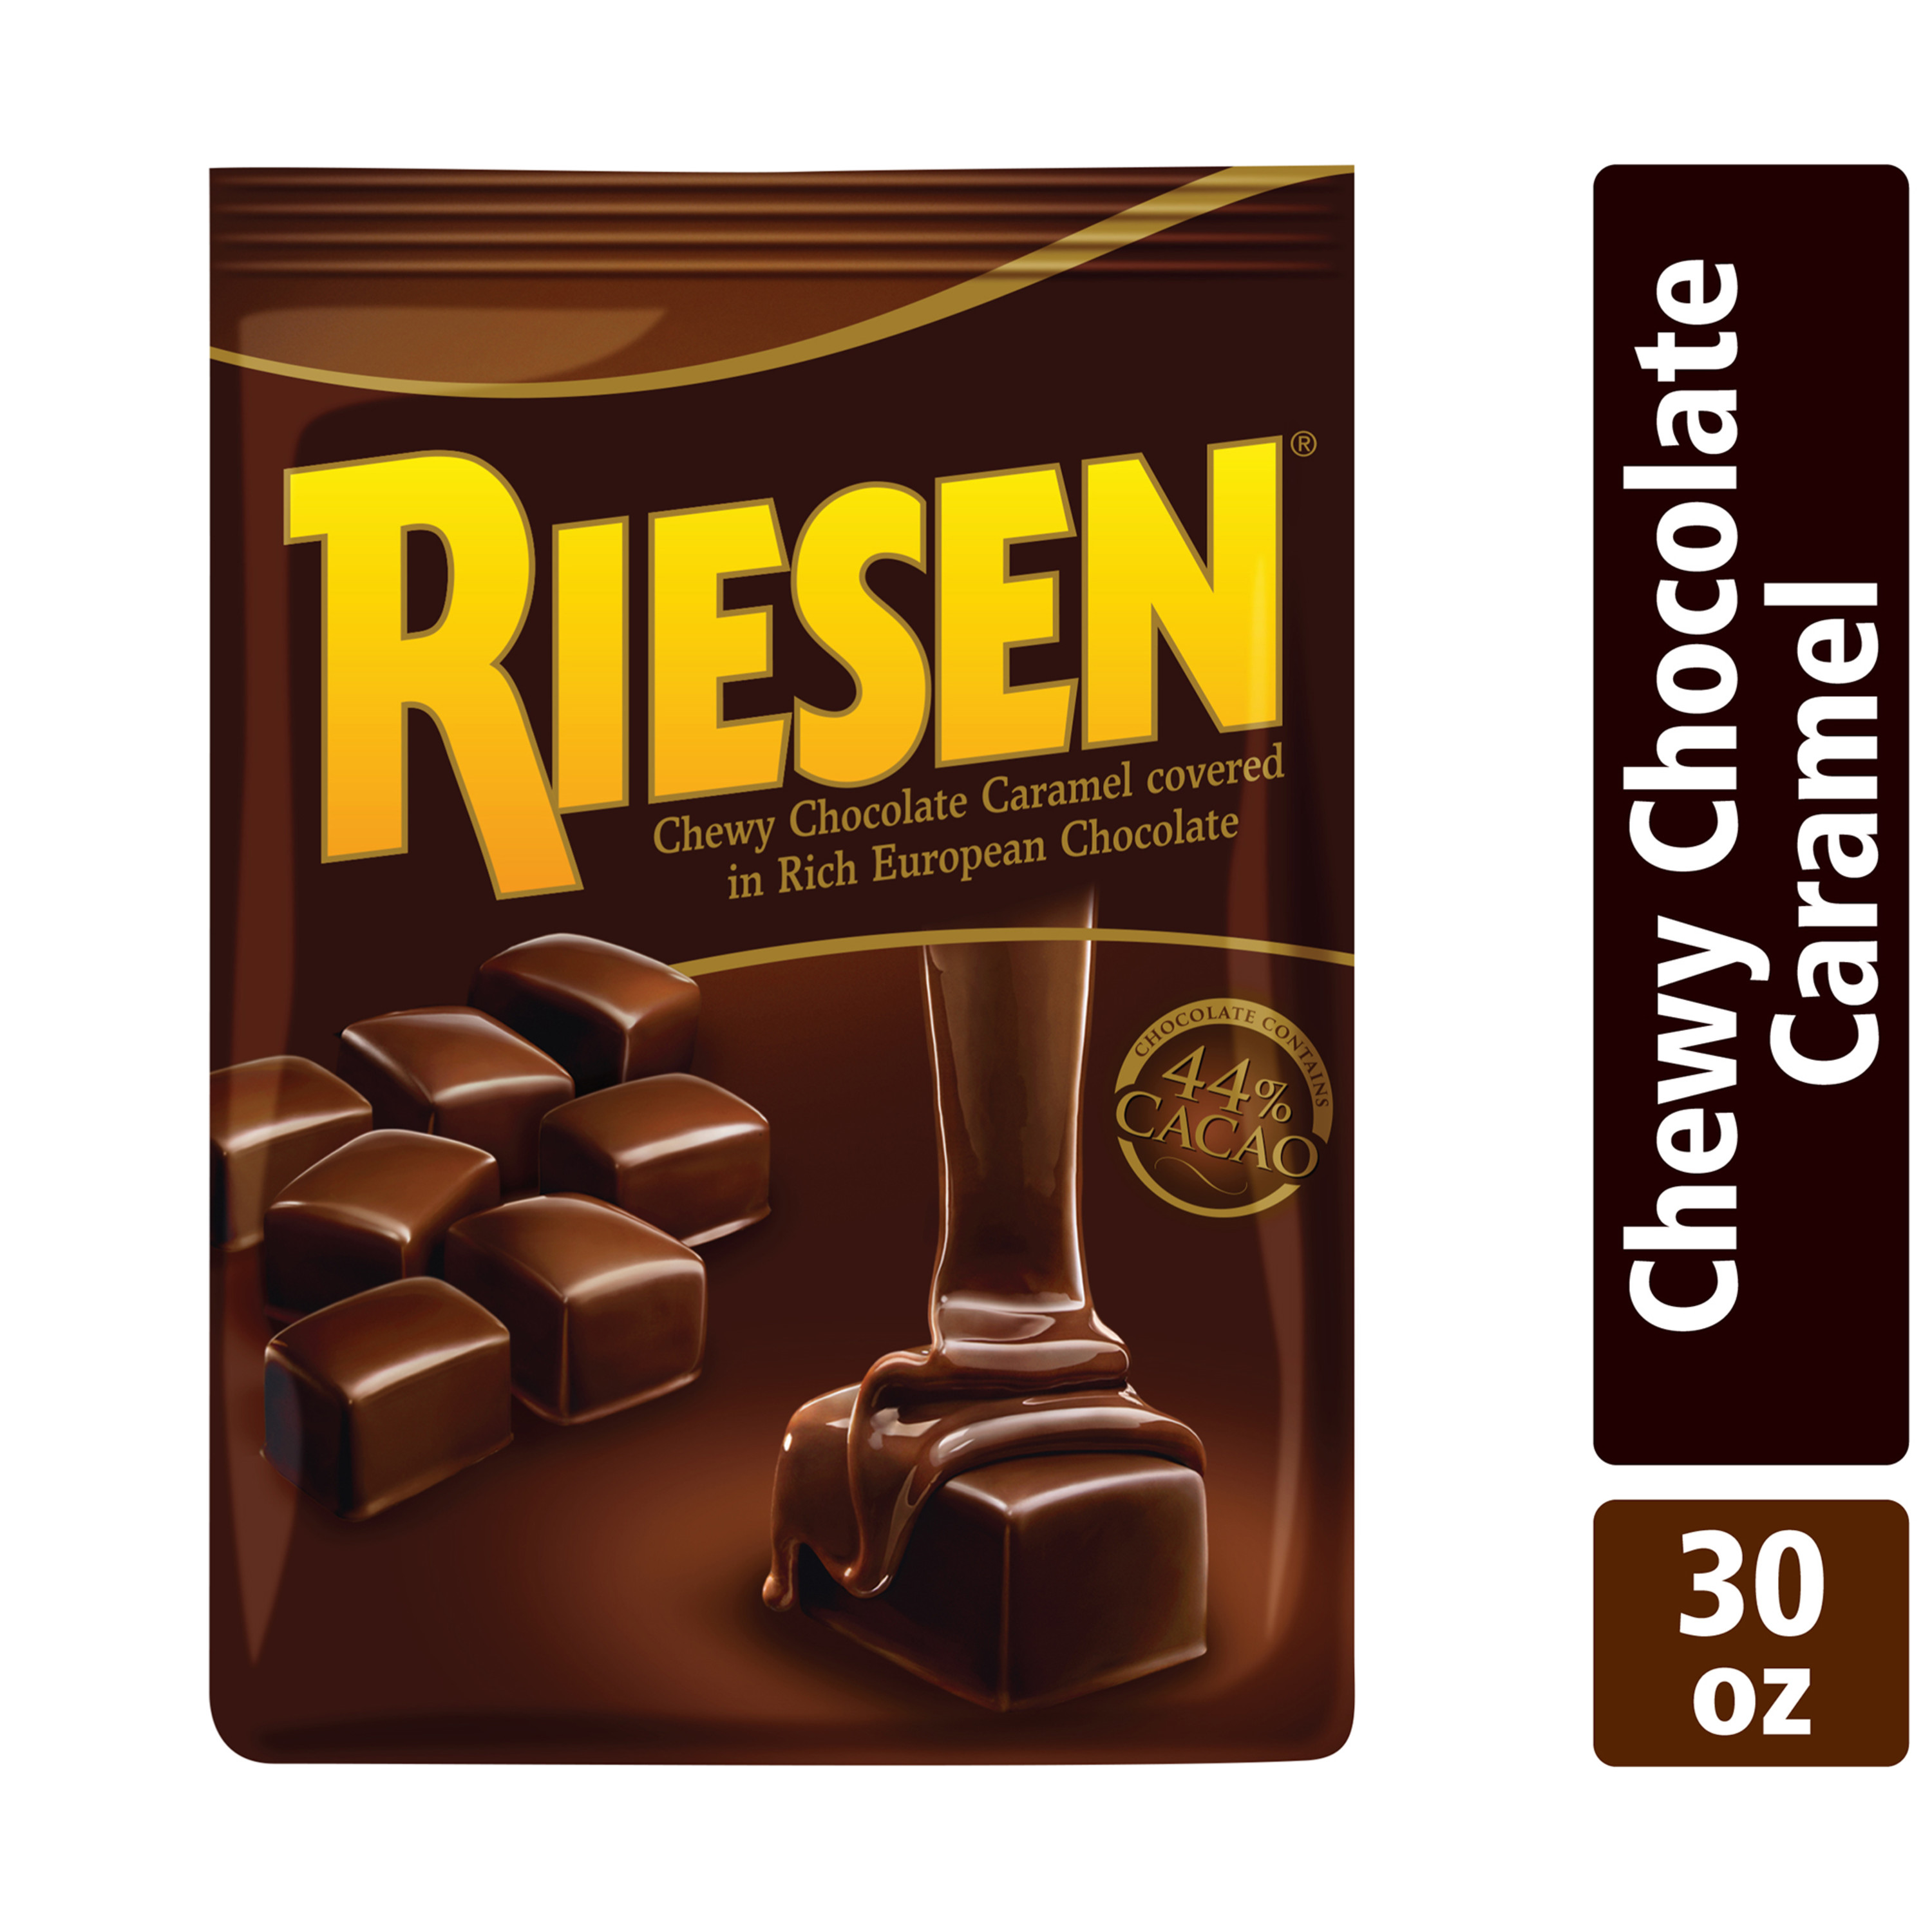 RIESEN Chewy Chocolate Covered Caramel Candy, 30 oz - image 1 of 7